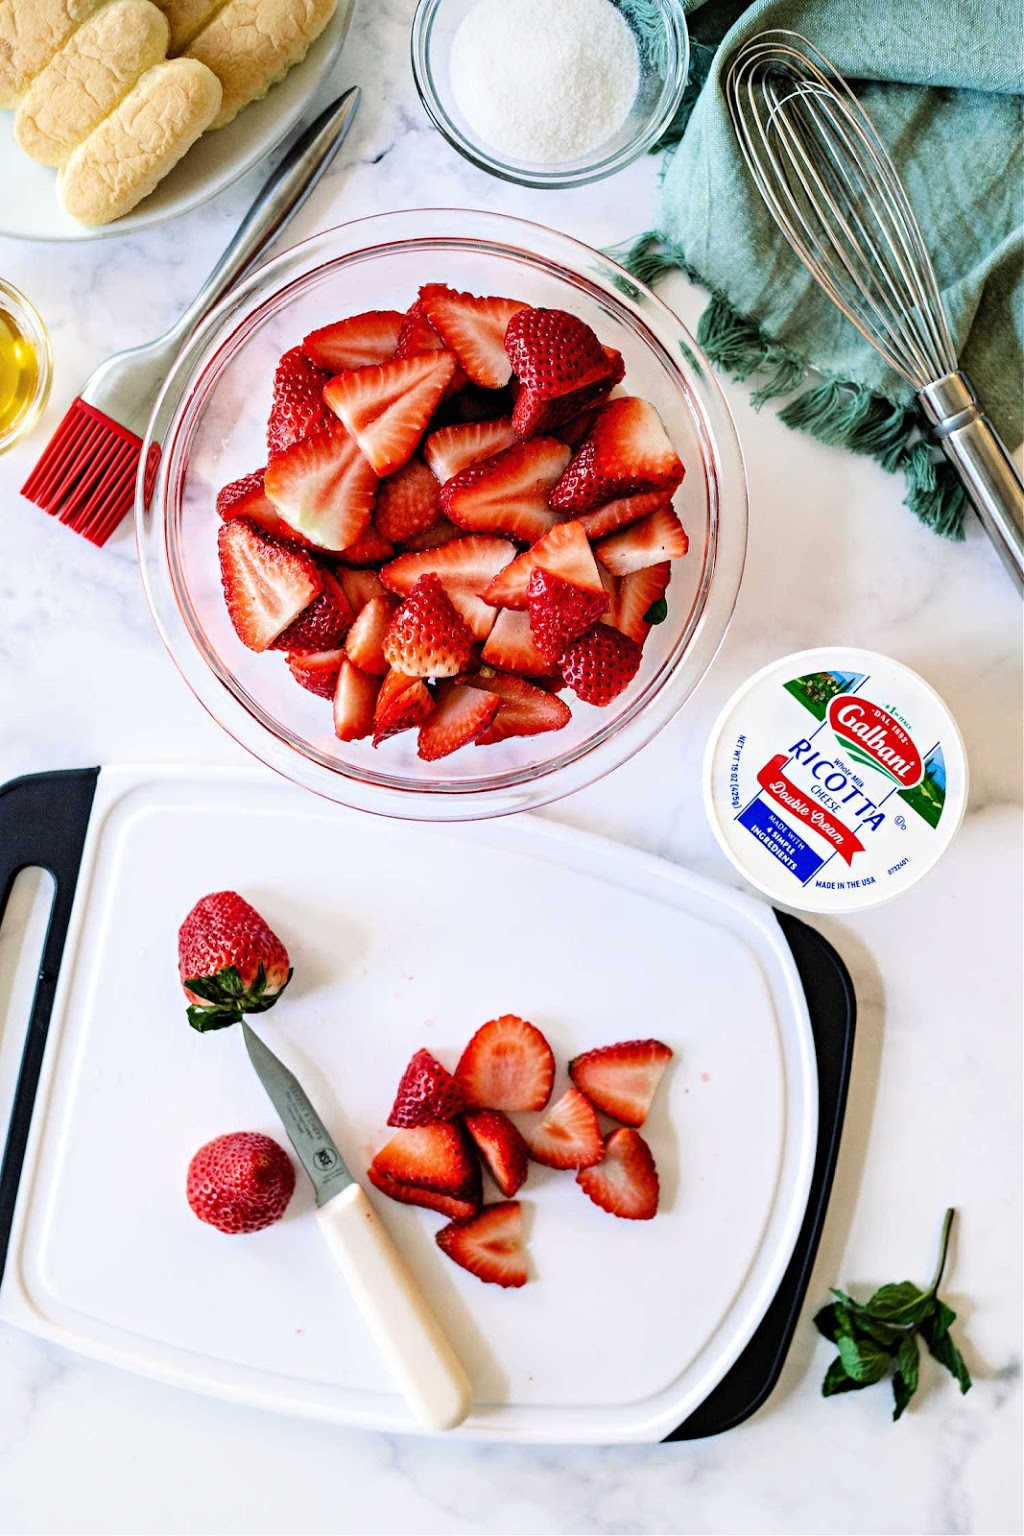 sliced strawberries in a glass bowl on a table.